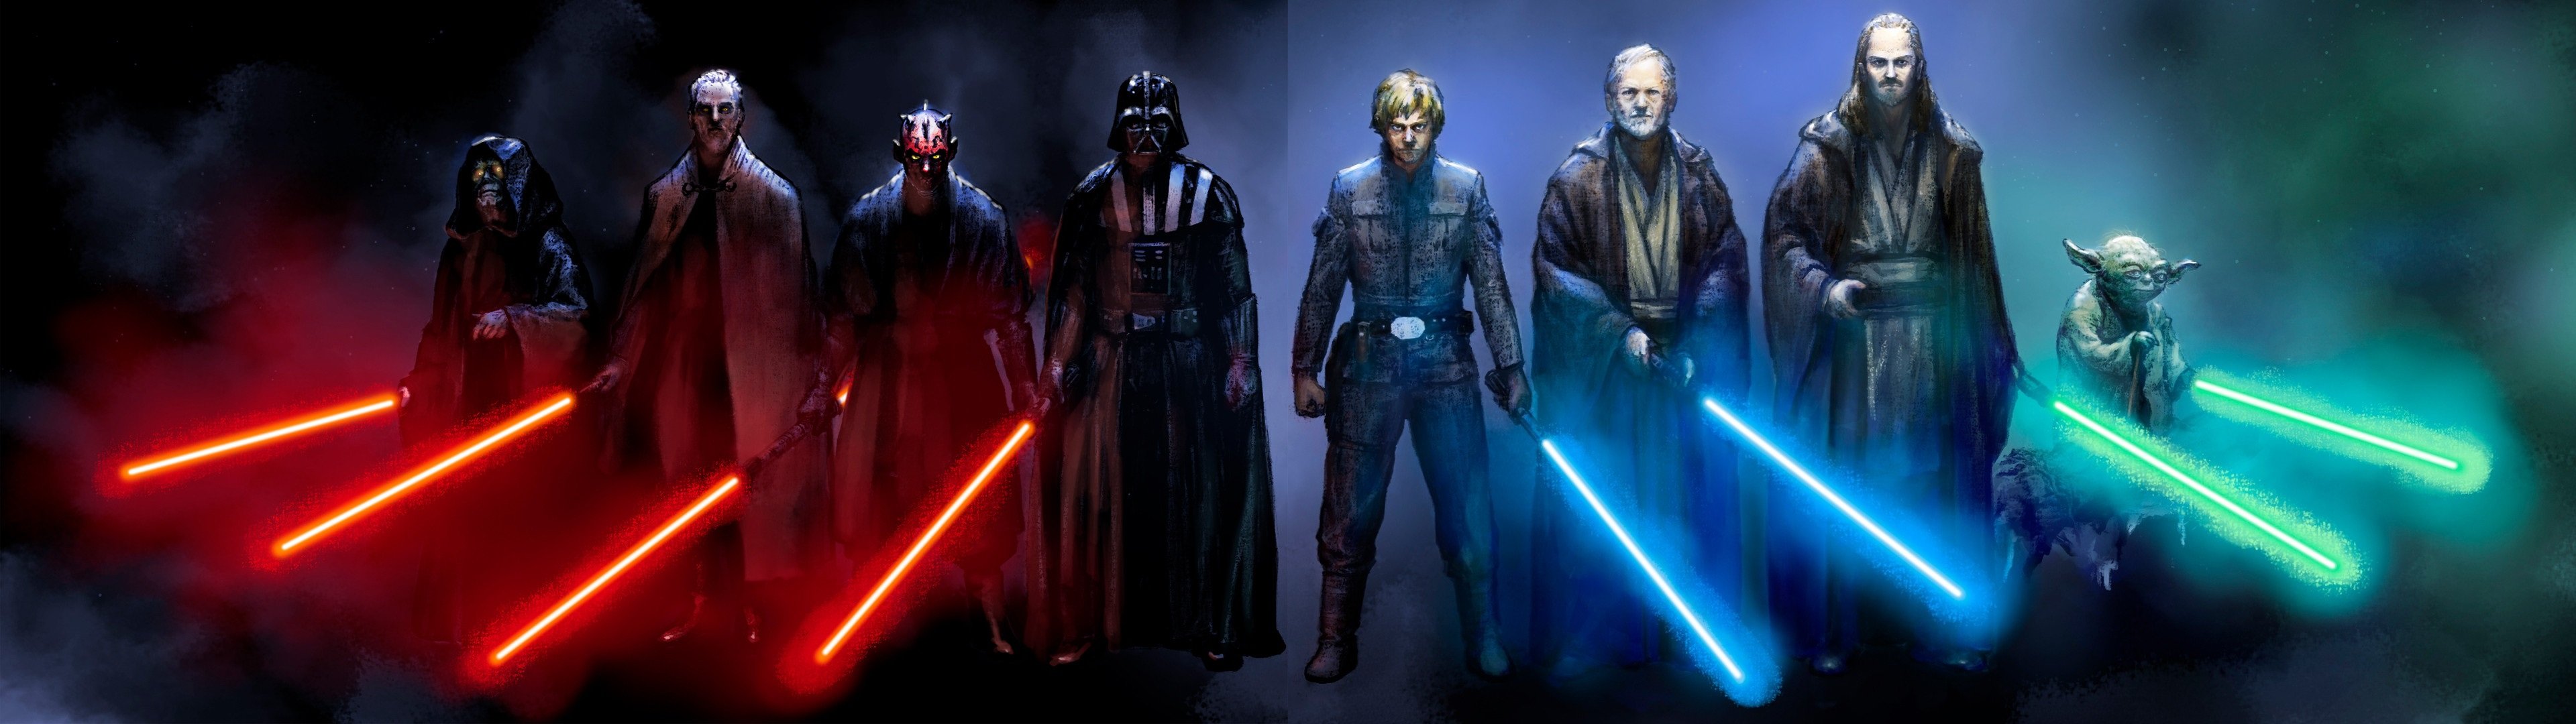 Awesome Star Wars Free Wallpaper Id 4600 For Dual Screen 3840x1080 Pc